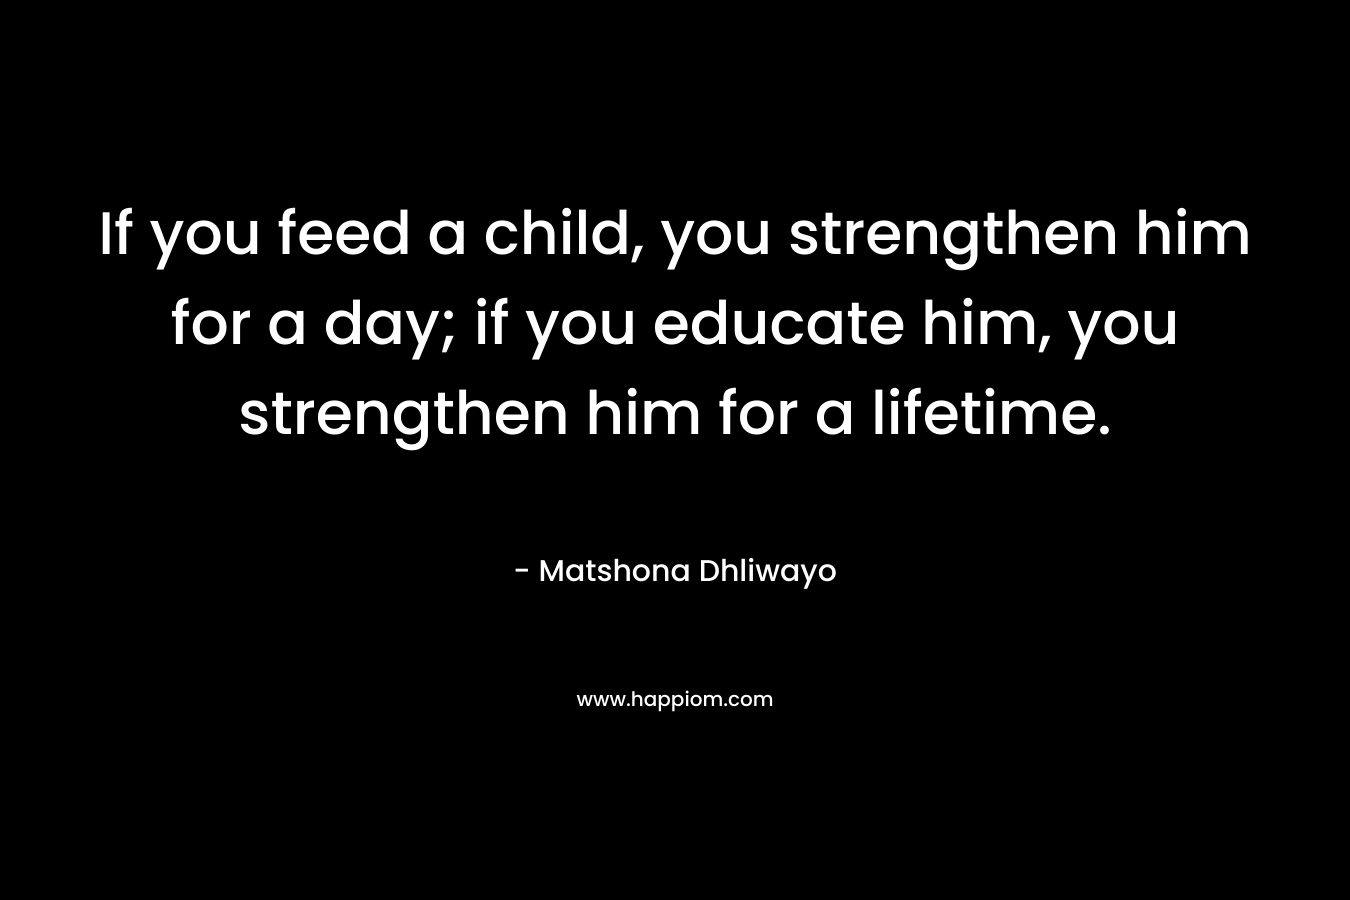 If you feed a child, you strengthen him for a day; if you educate him, you strengthen him for a lifetime. – Matshona Dhliwayo